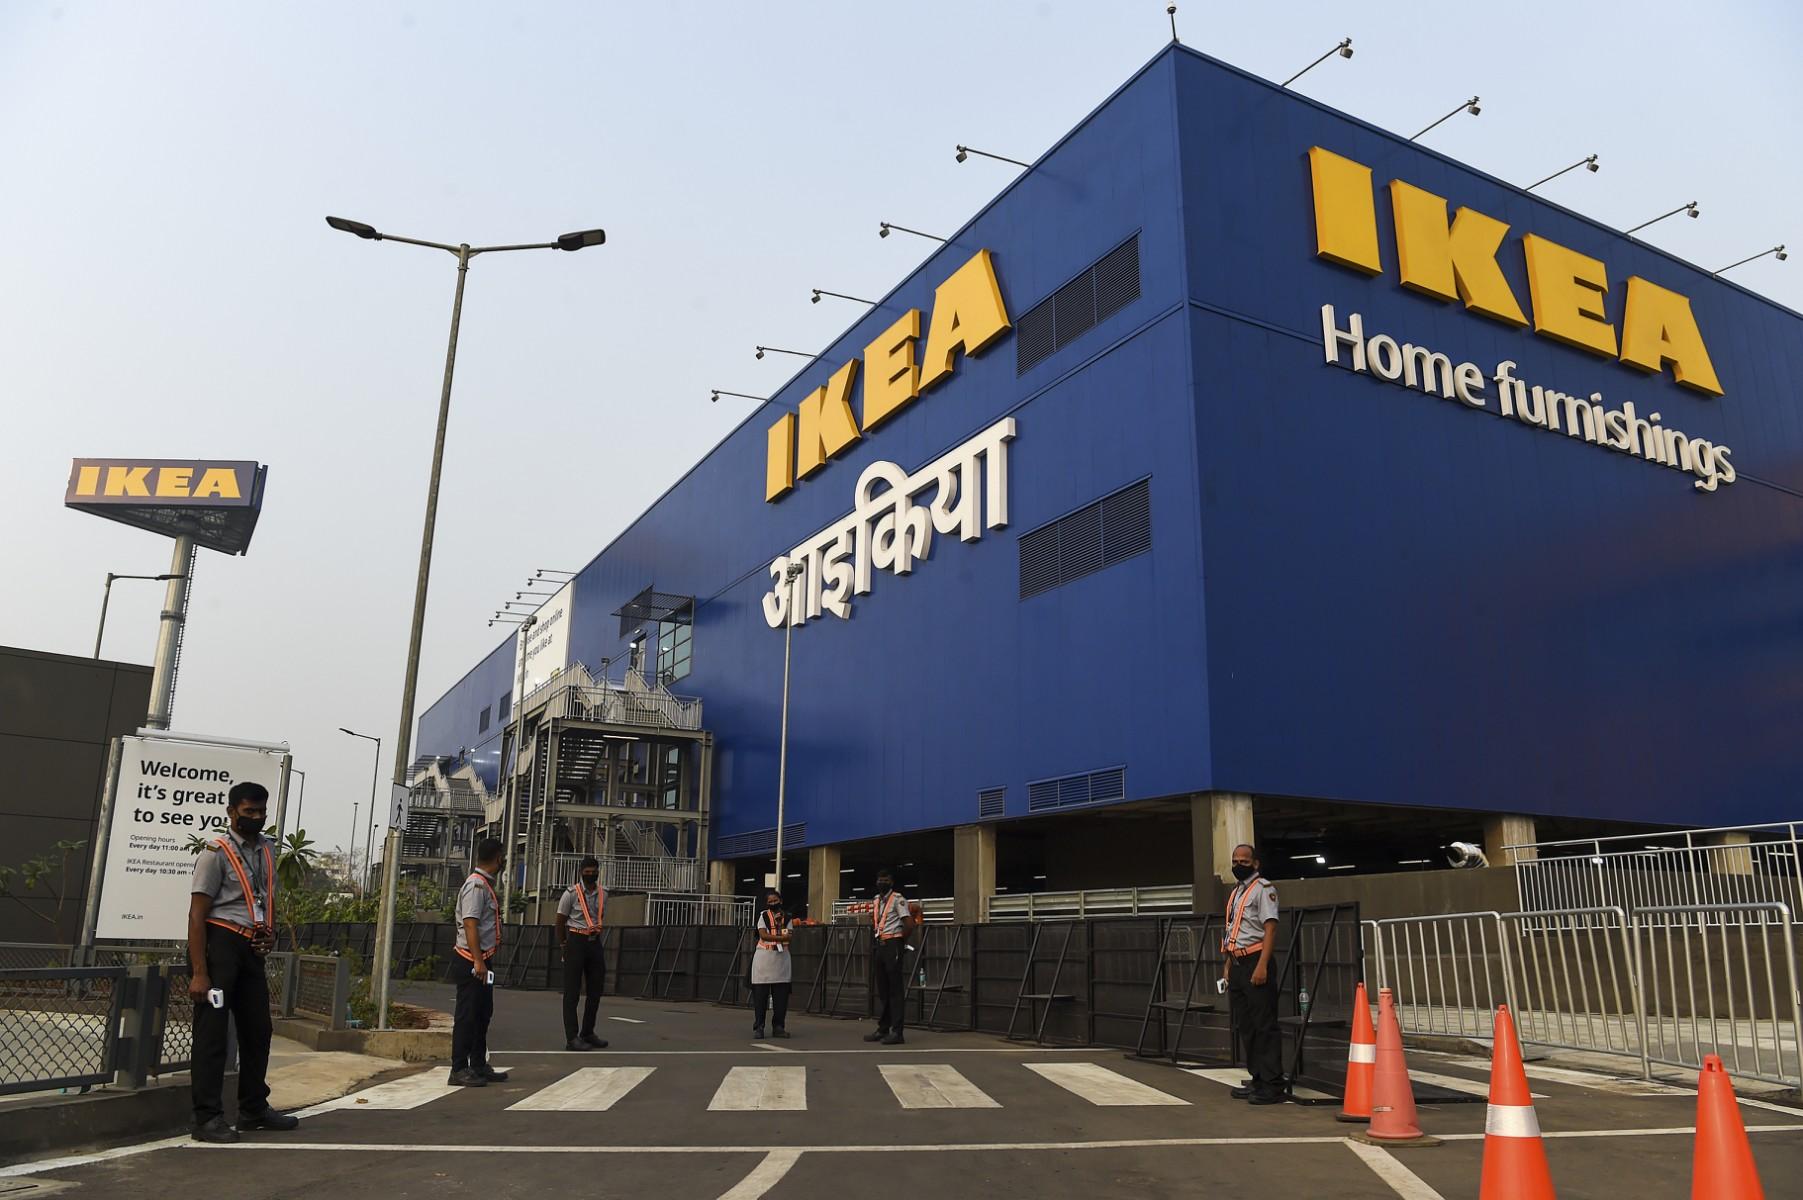 Security personnel stand guard at the entrance of new IKEA store in Navi Mumbai on December 17, 2020. Photo: AFP